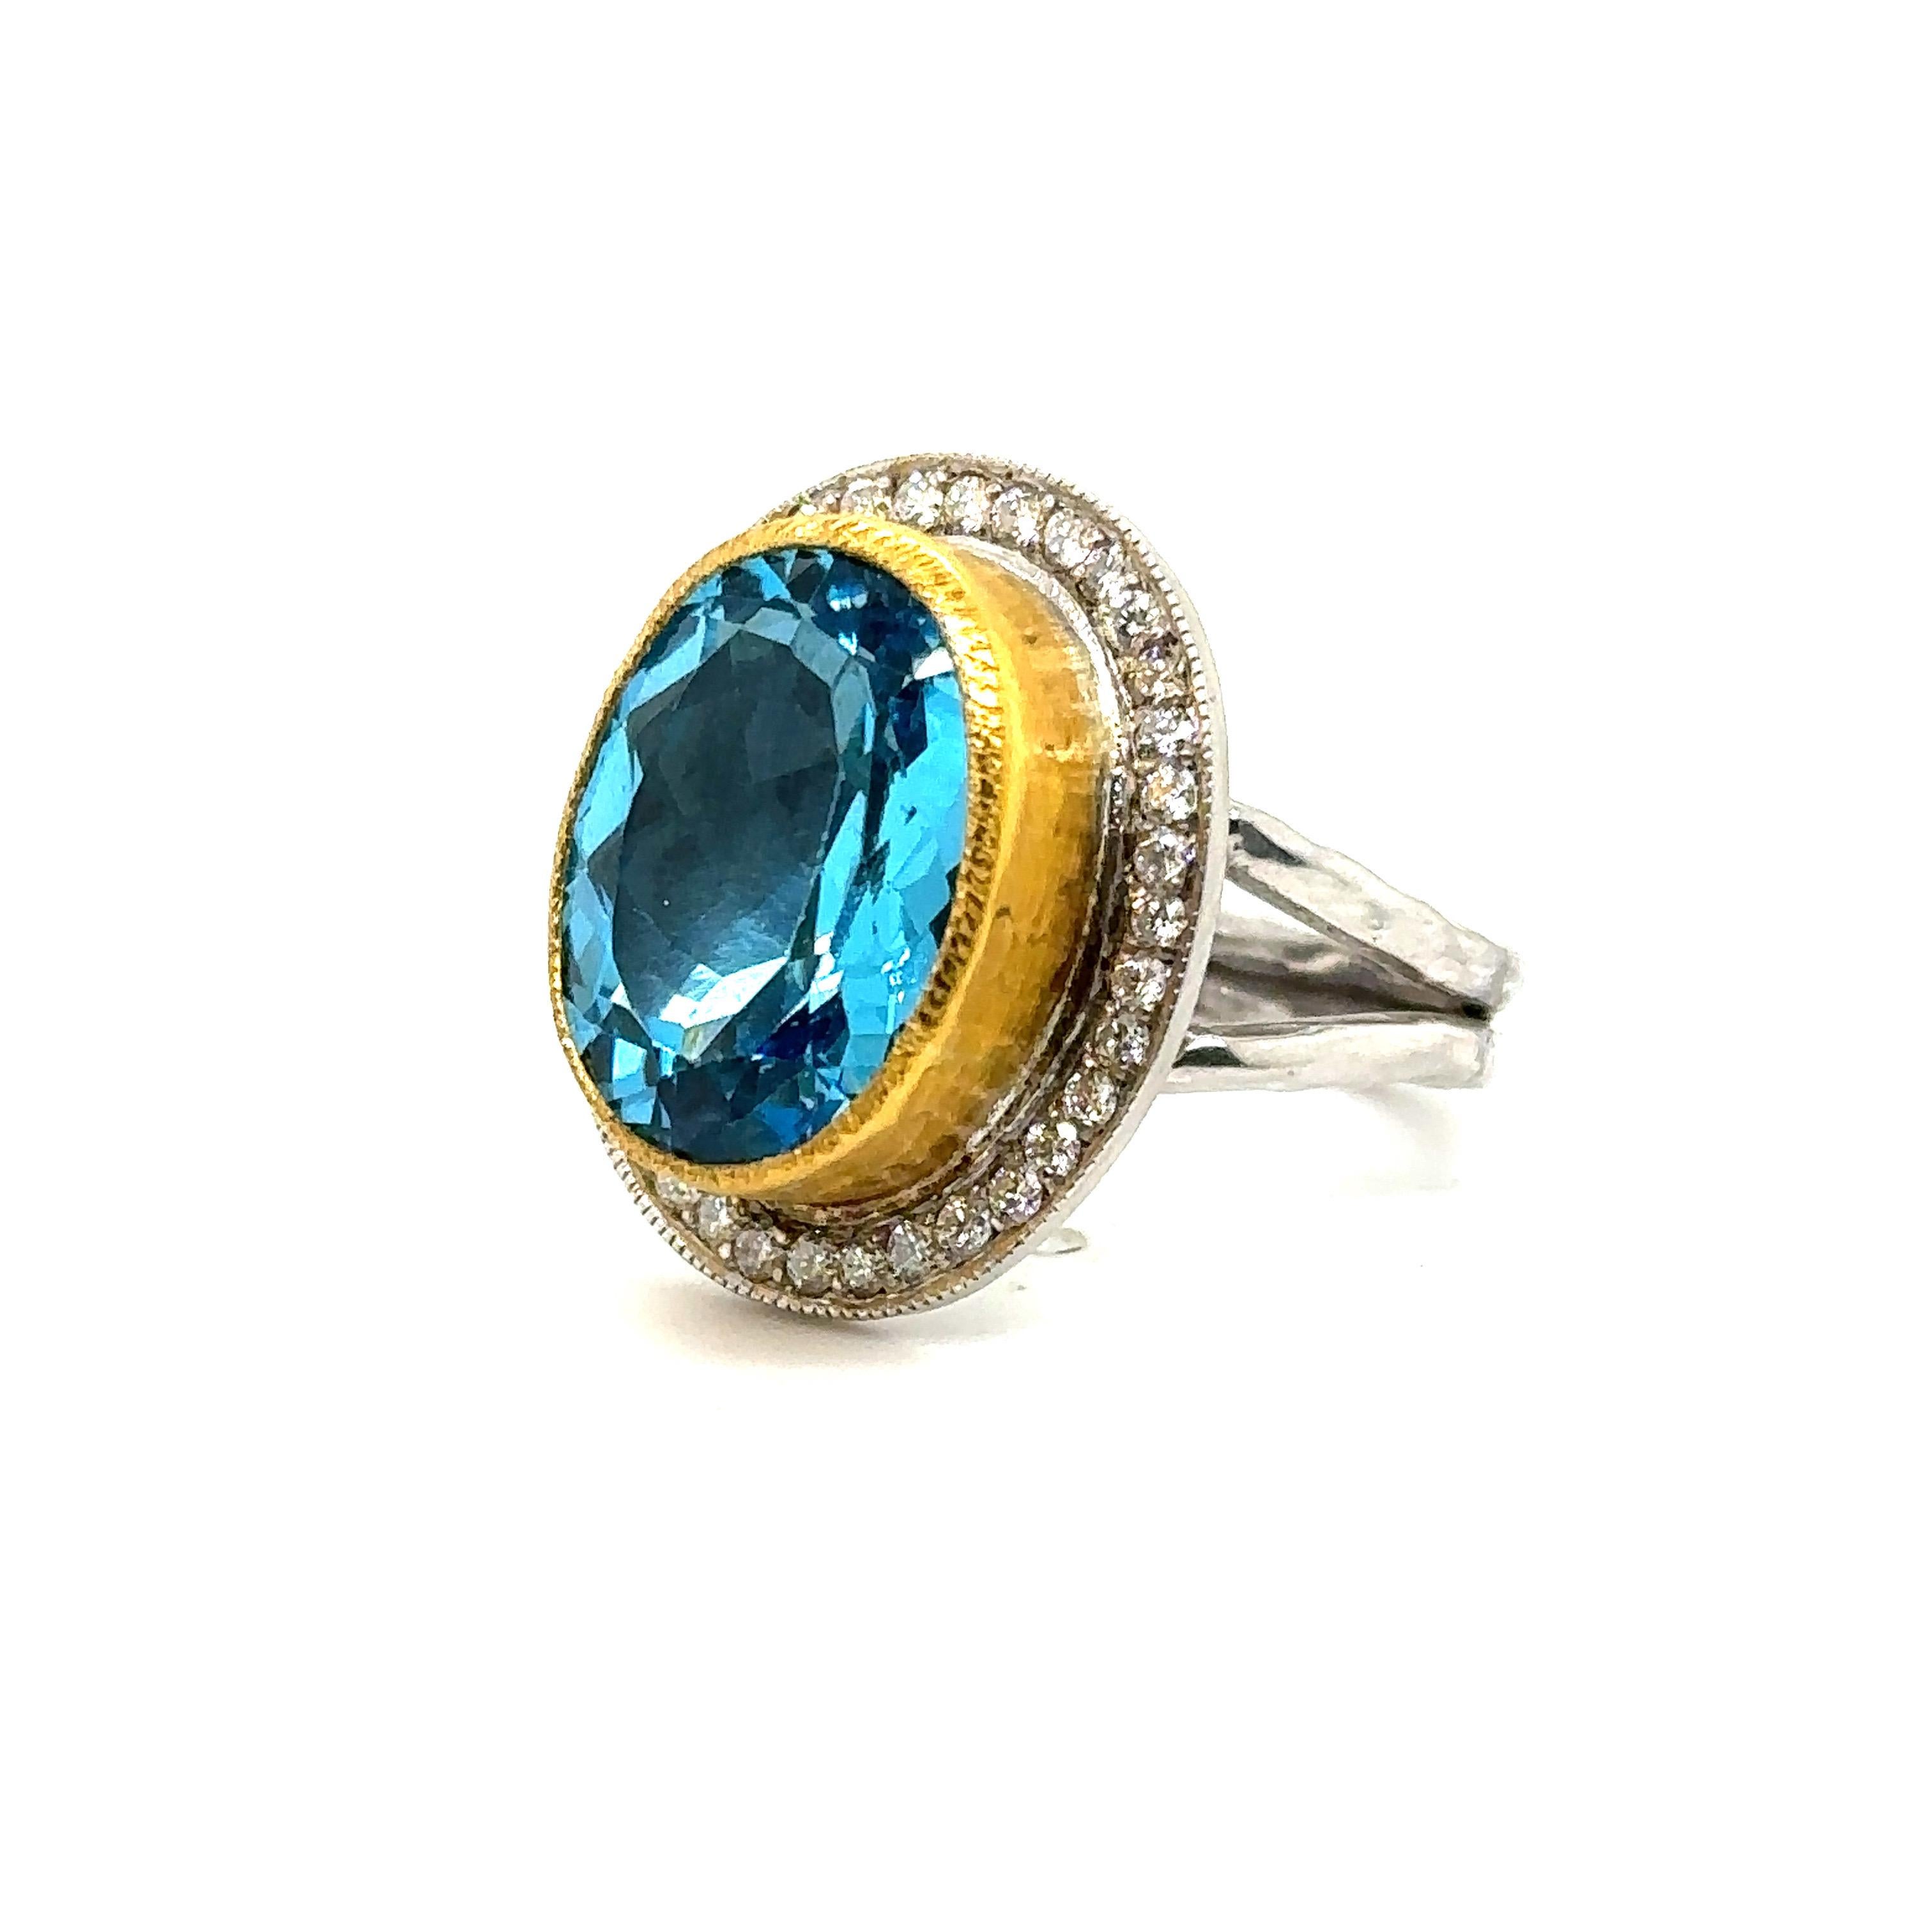 Oval Cut JAS-22-305 - 24K GOLD/STERLING SILVER RING with DIAMONDS AND SWISS BLUE TOPAZ For Sale